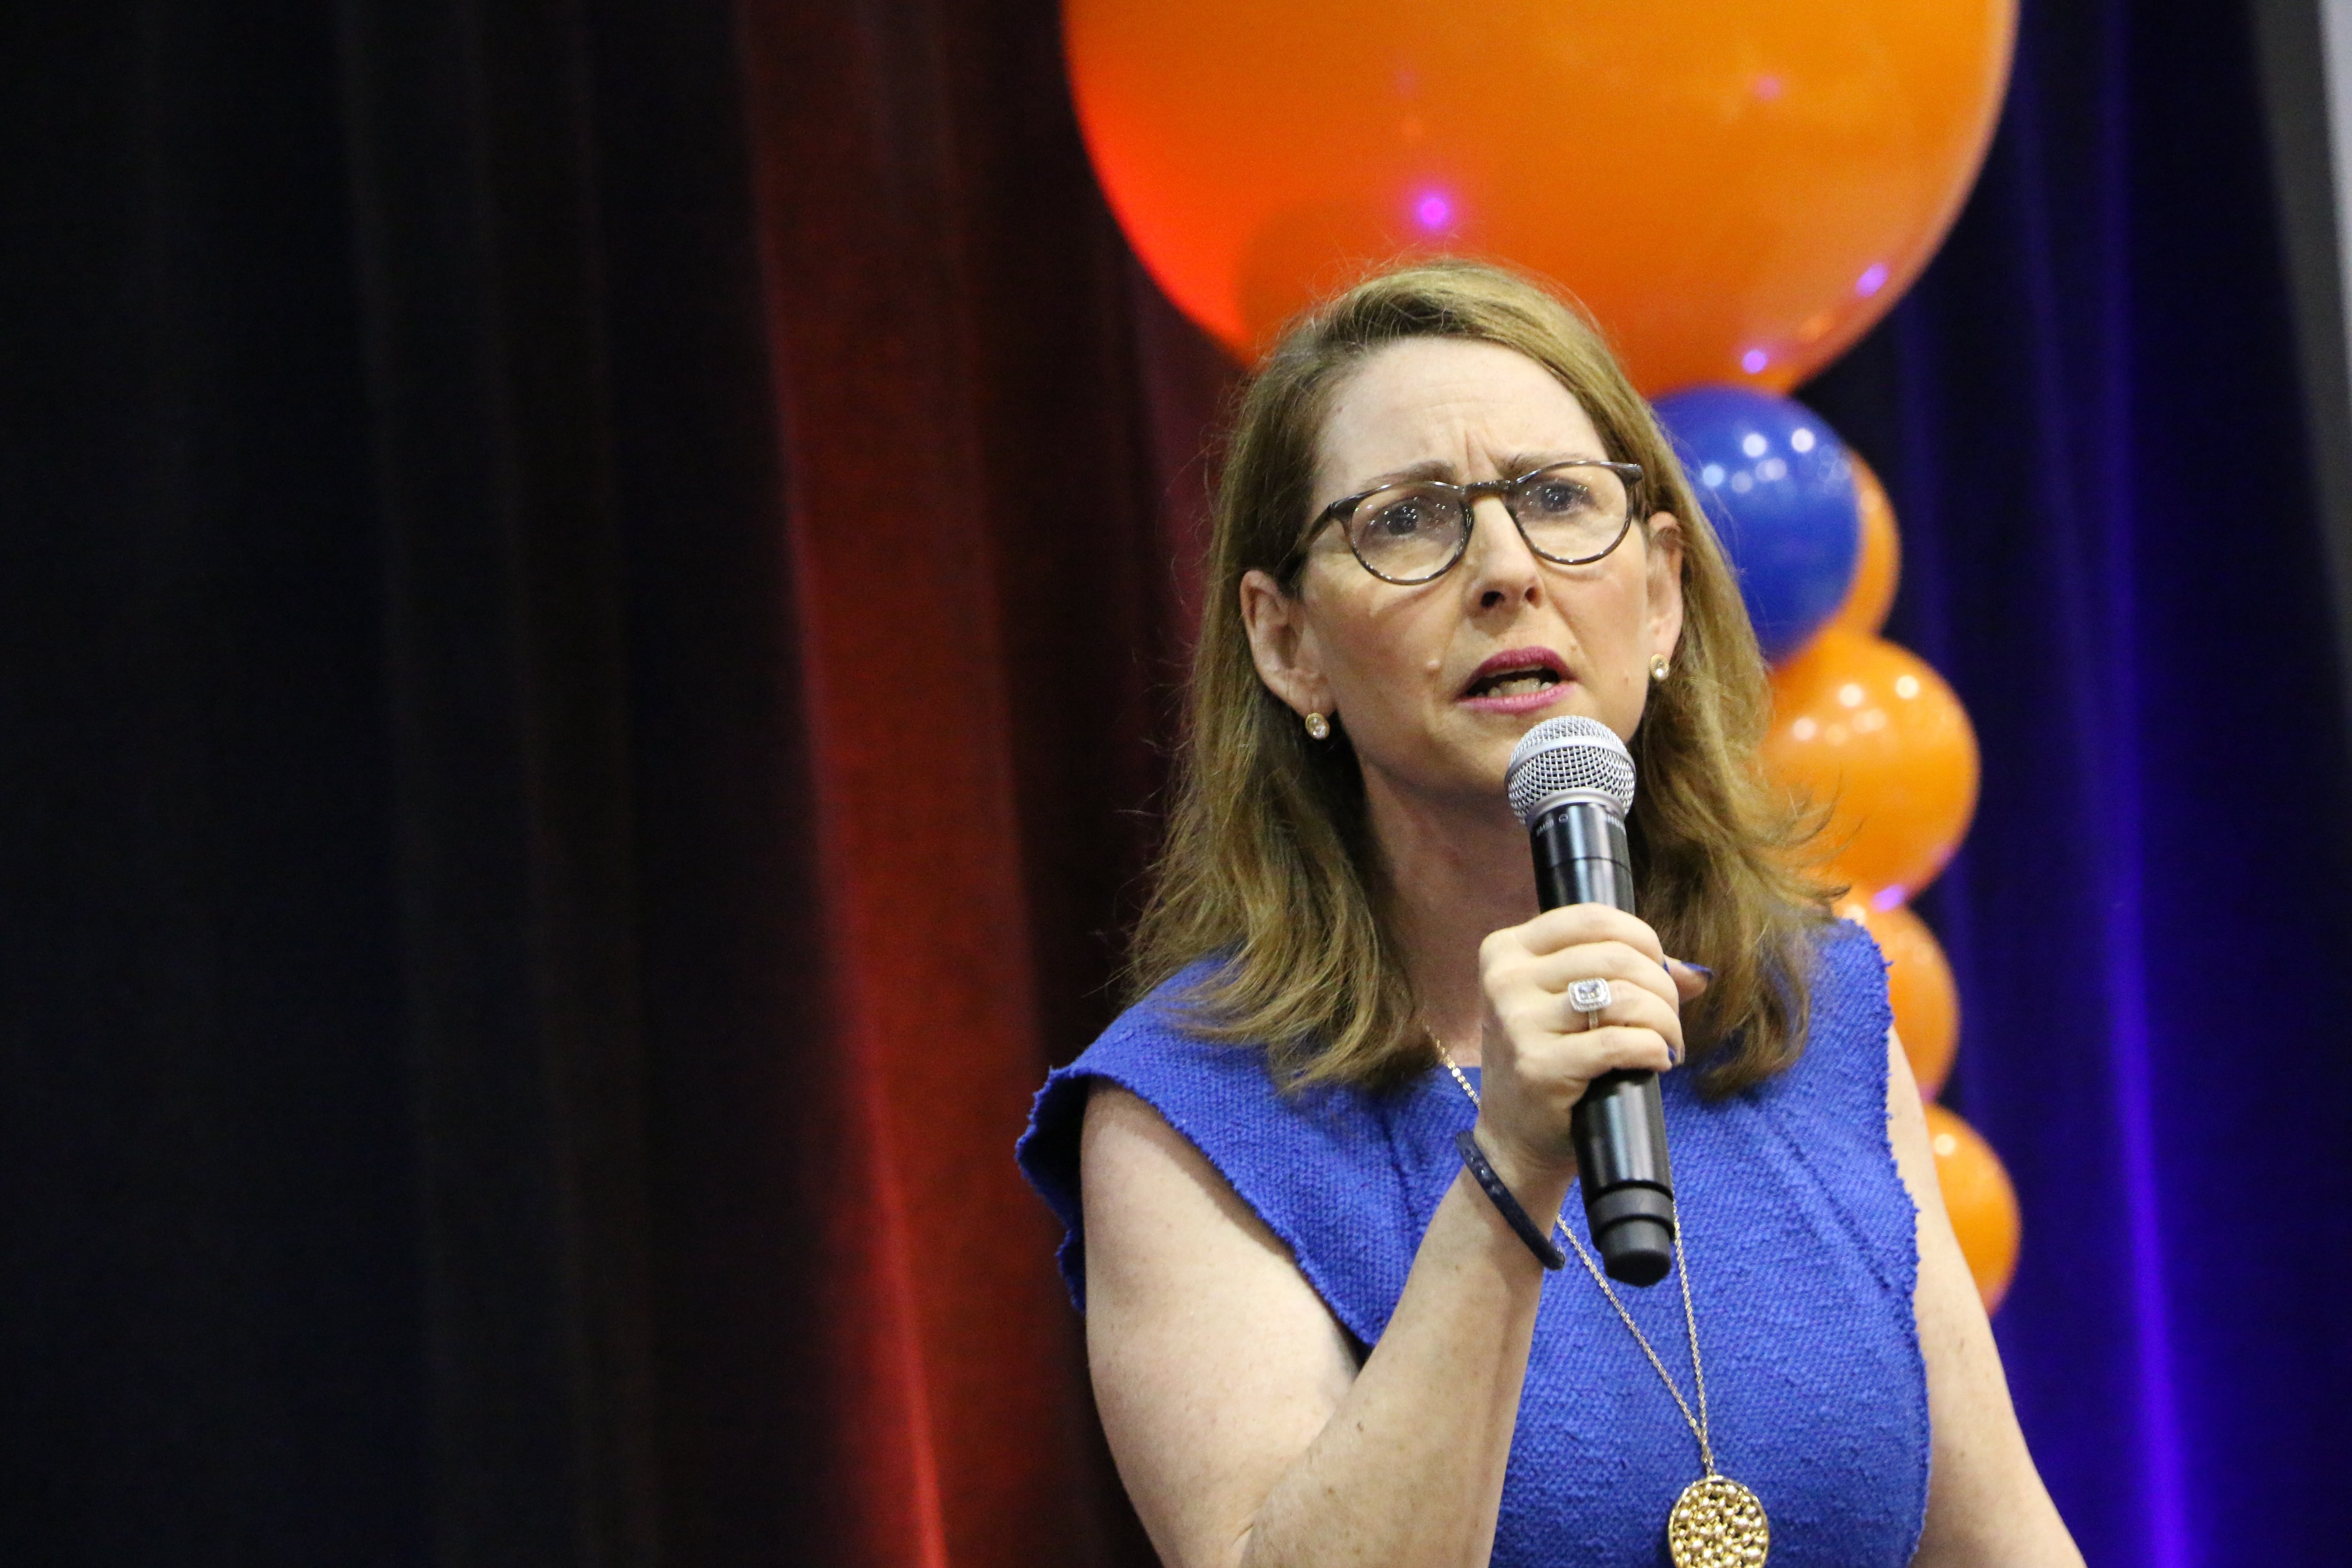 A woman with medium length brown hair, glasses and wearing a blue blouse, holds a microphone while speaking in front of balloons and a backdrop.